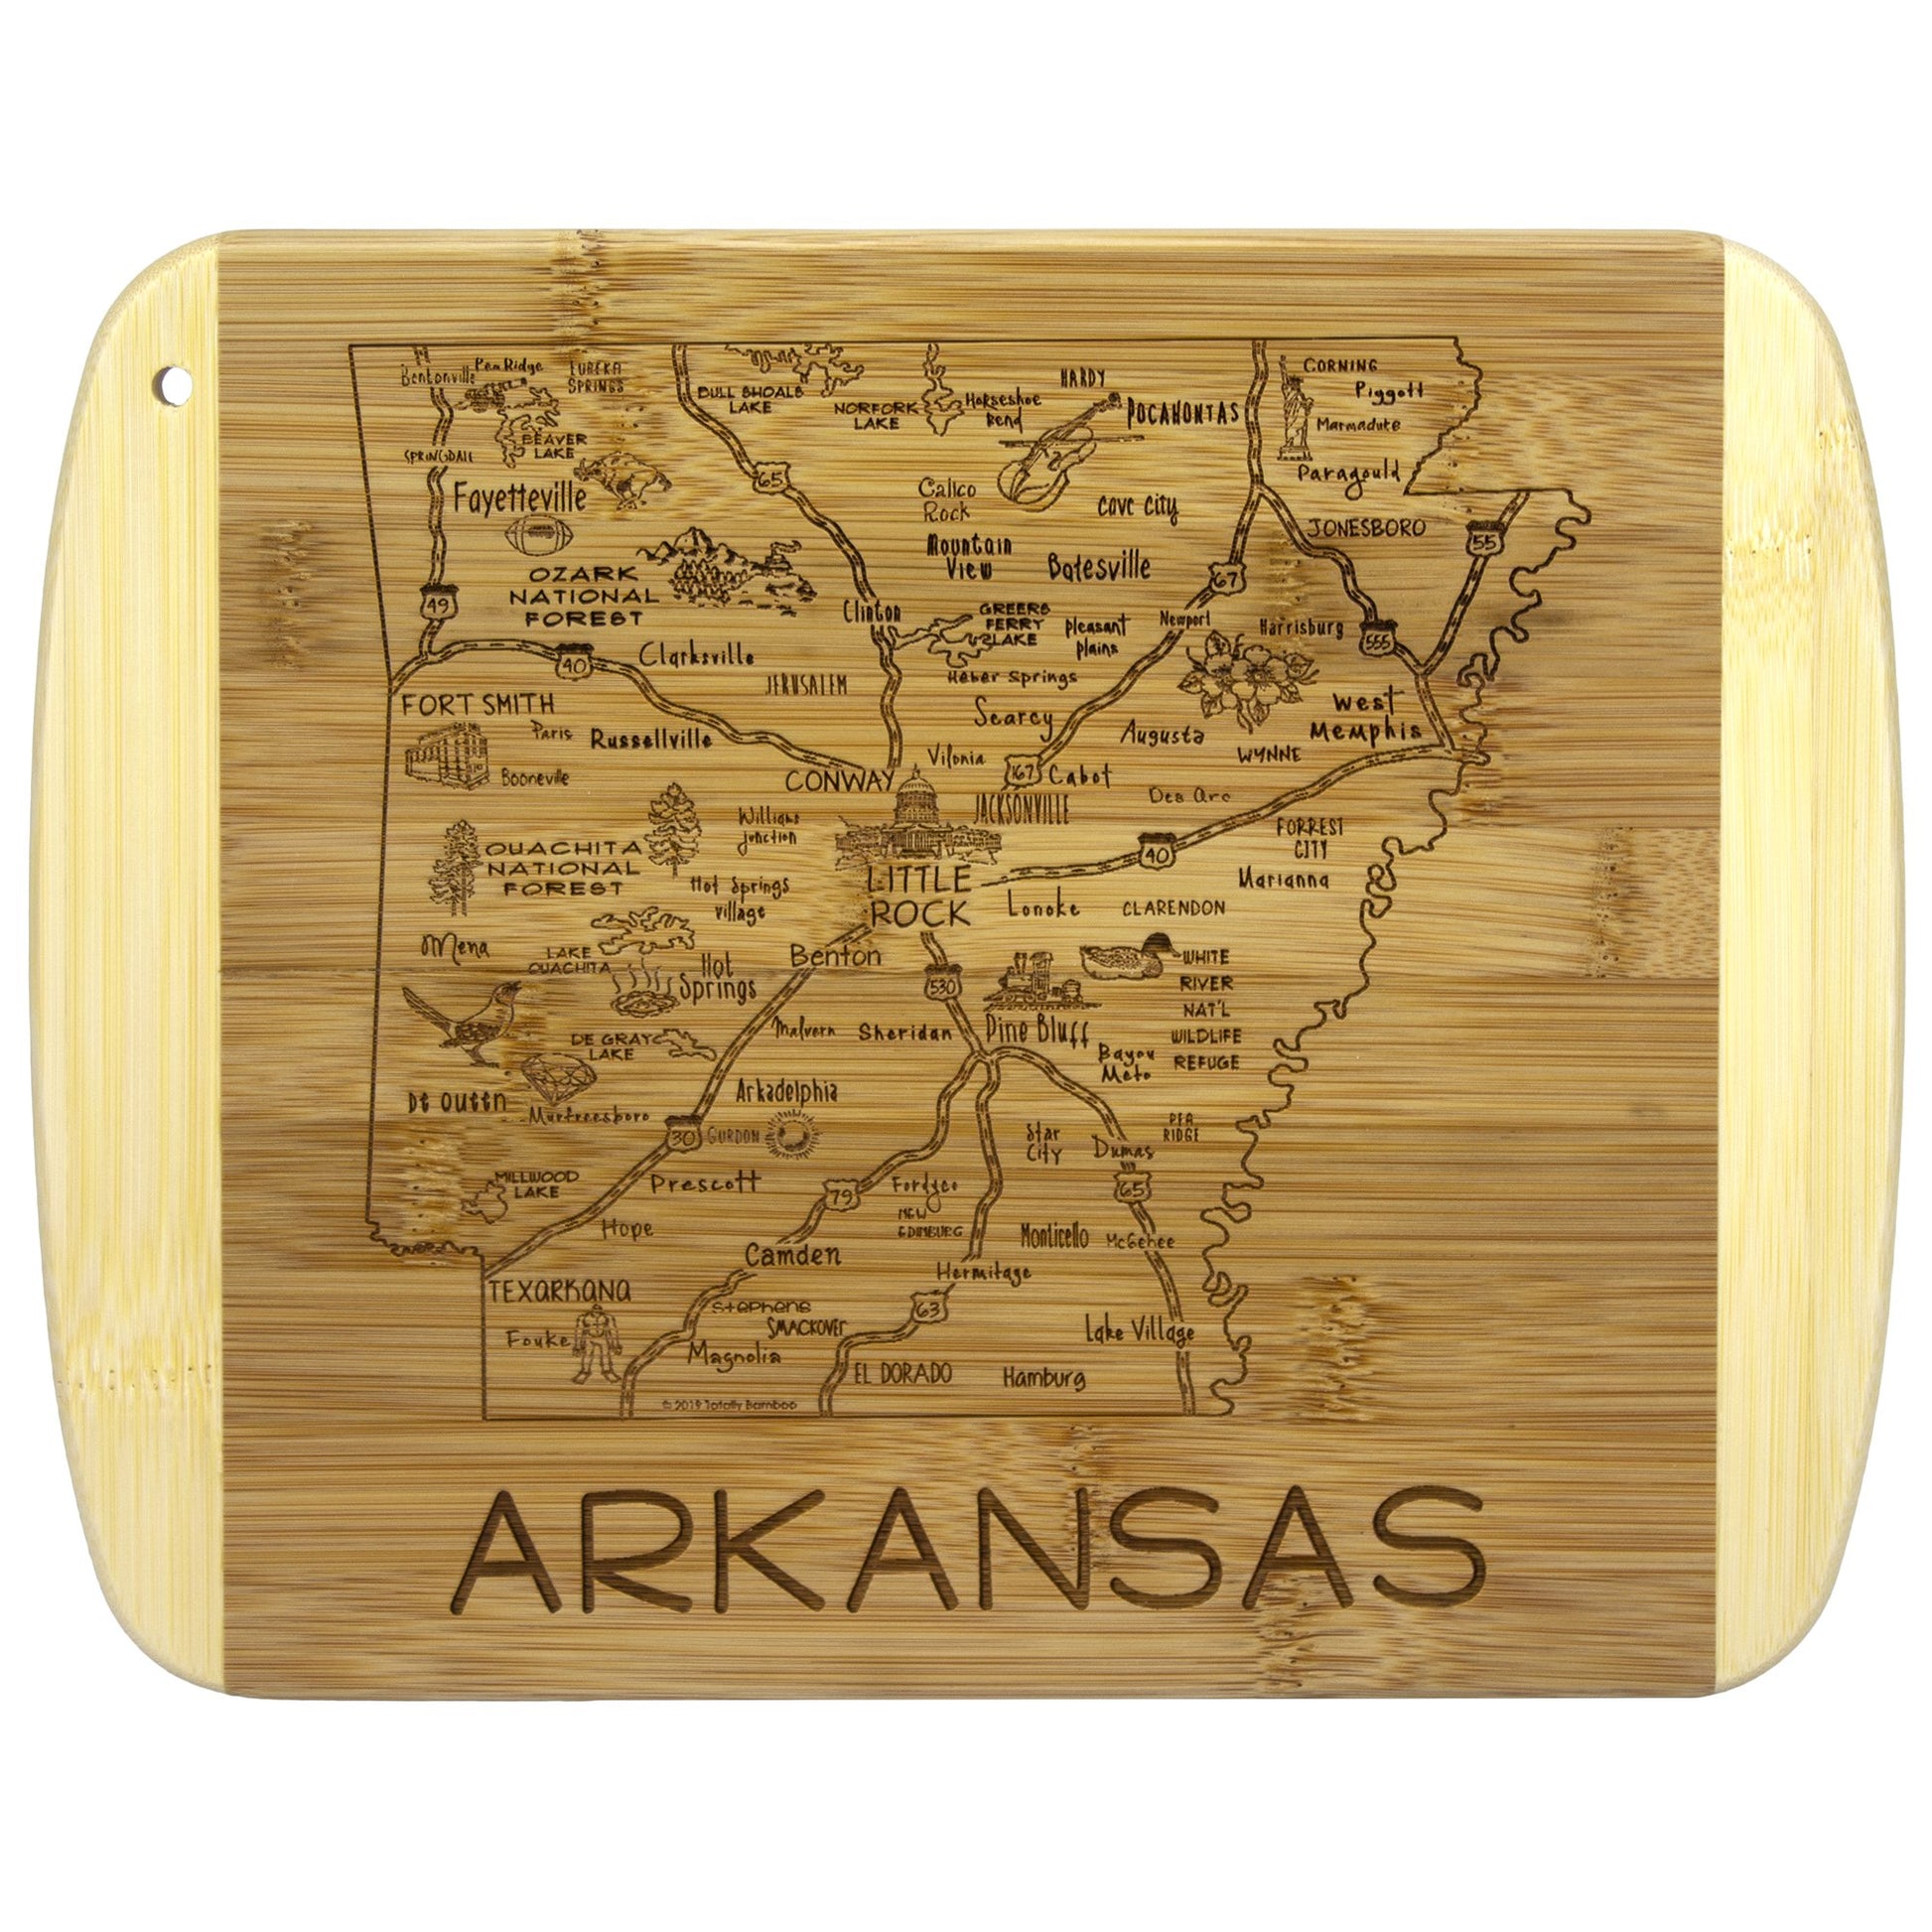 wood board laser cut with the shaped of Arkansas, cities, and the name "Arkansas" across the bottom.